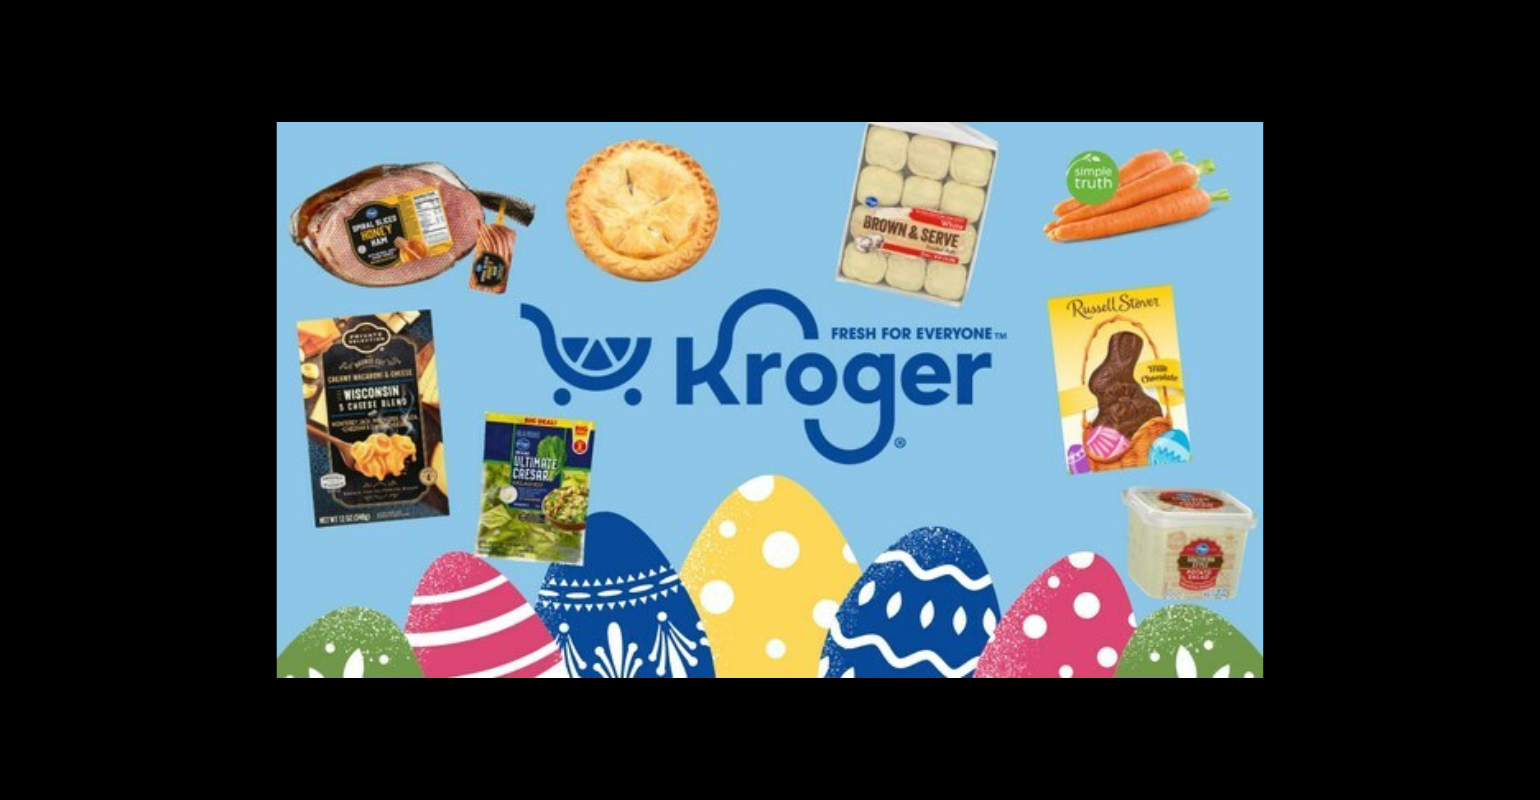 Kroger advertising Easter meal for less than 7.50 per person